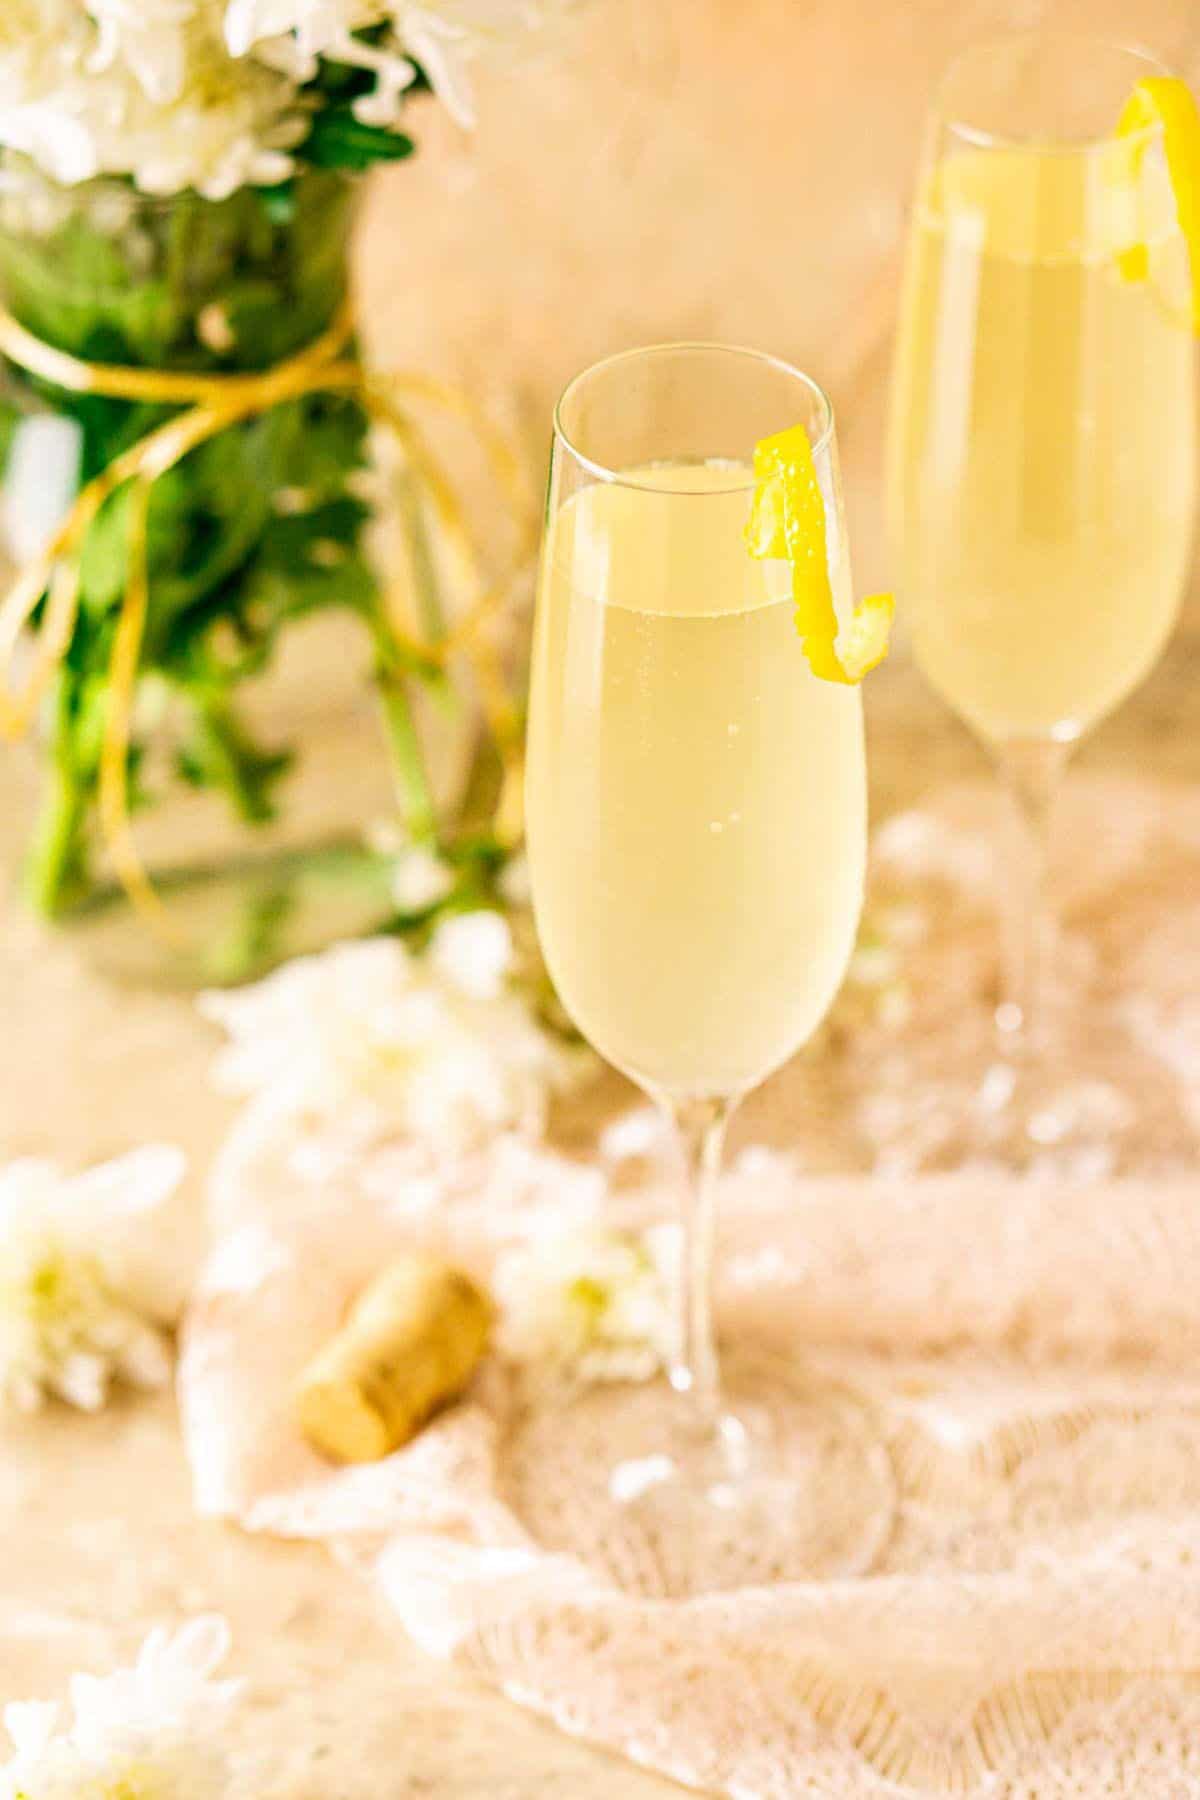 A French 76 on cream-colored lace with white flowers around it and a bouquet in the background.